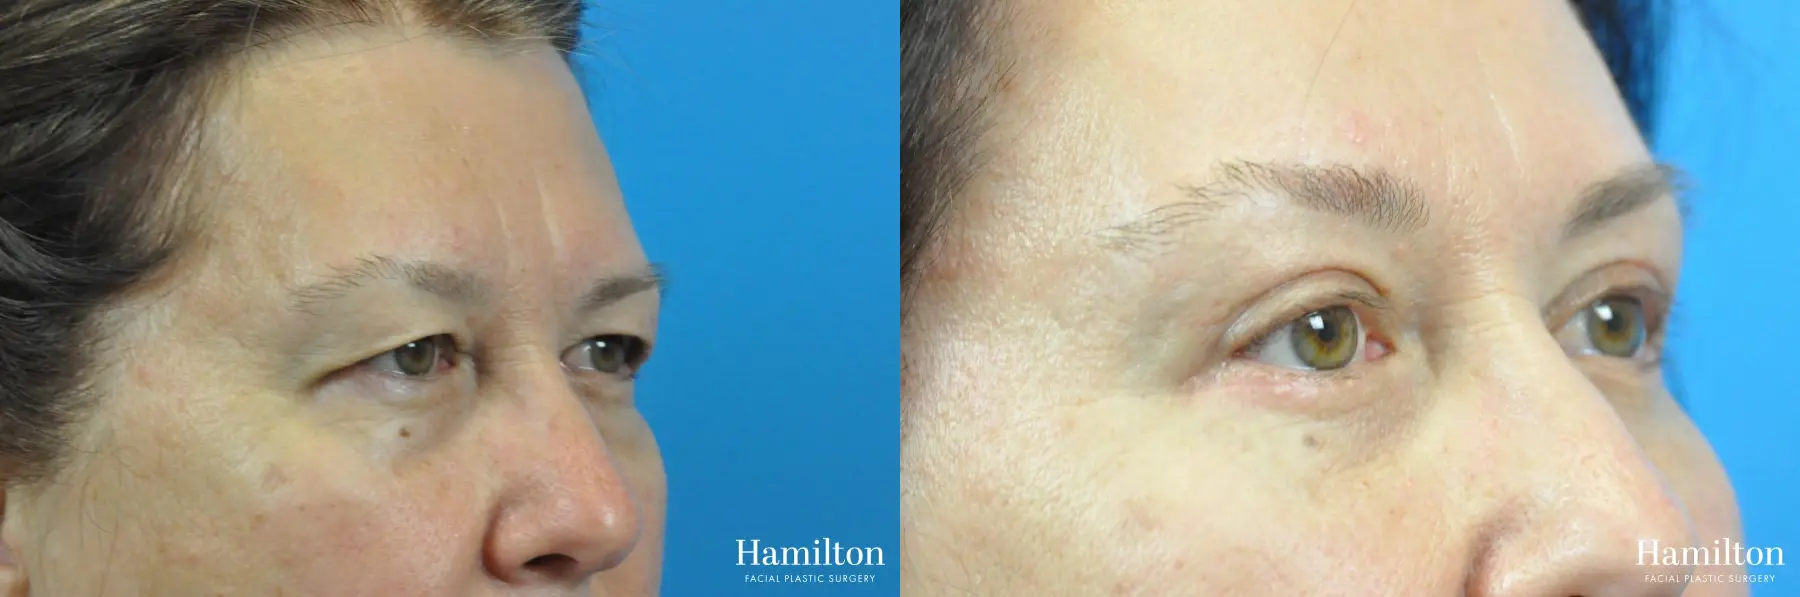 Brow Lift: Patient 6 - Before and After 1